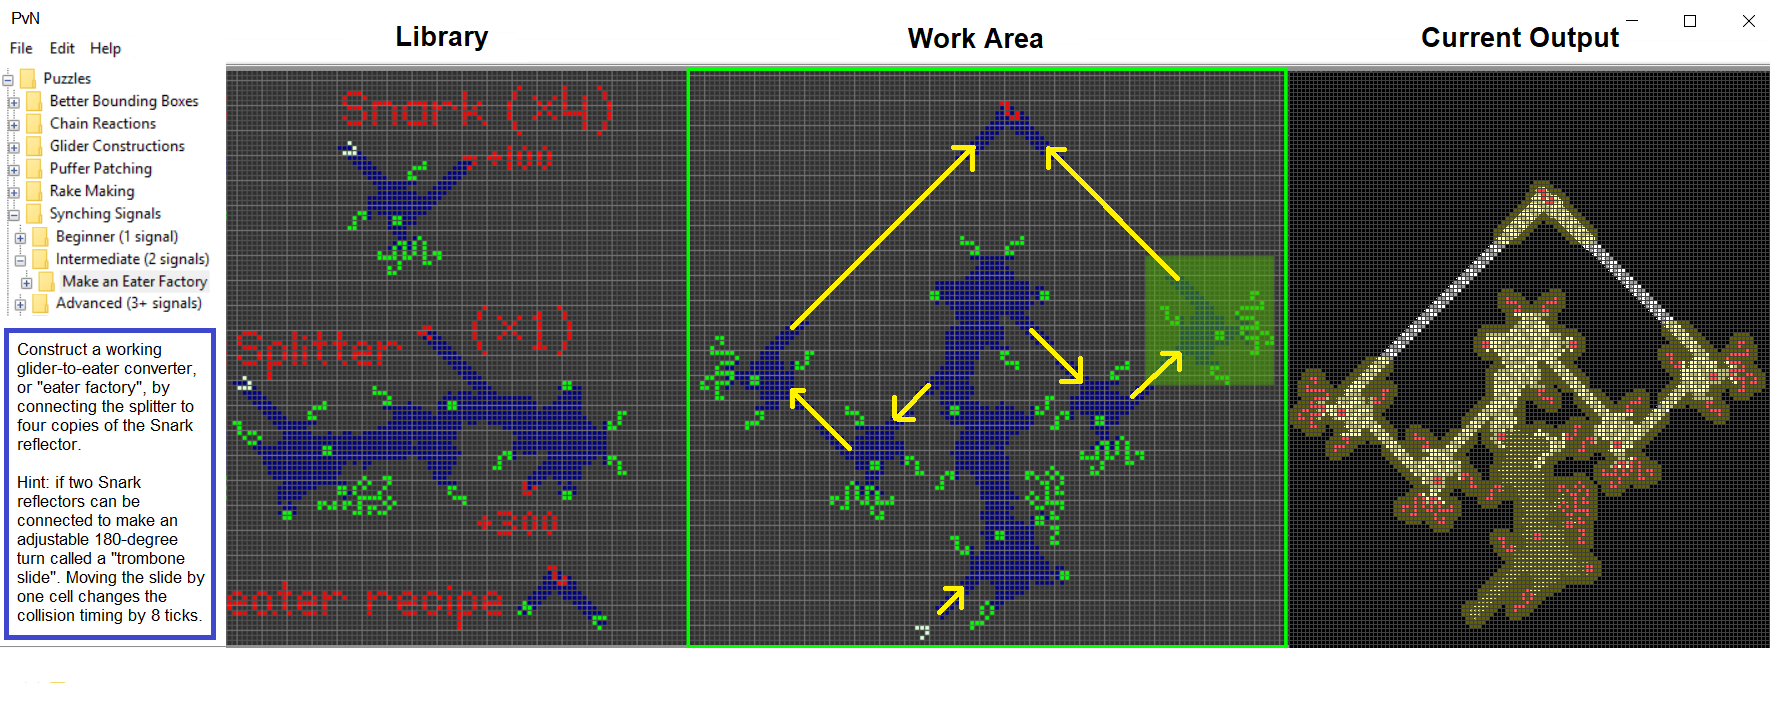 mock-up screenshot from Project von Neumann Puzzle Editor